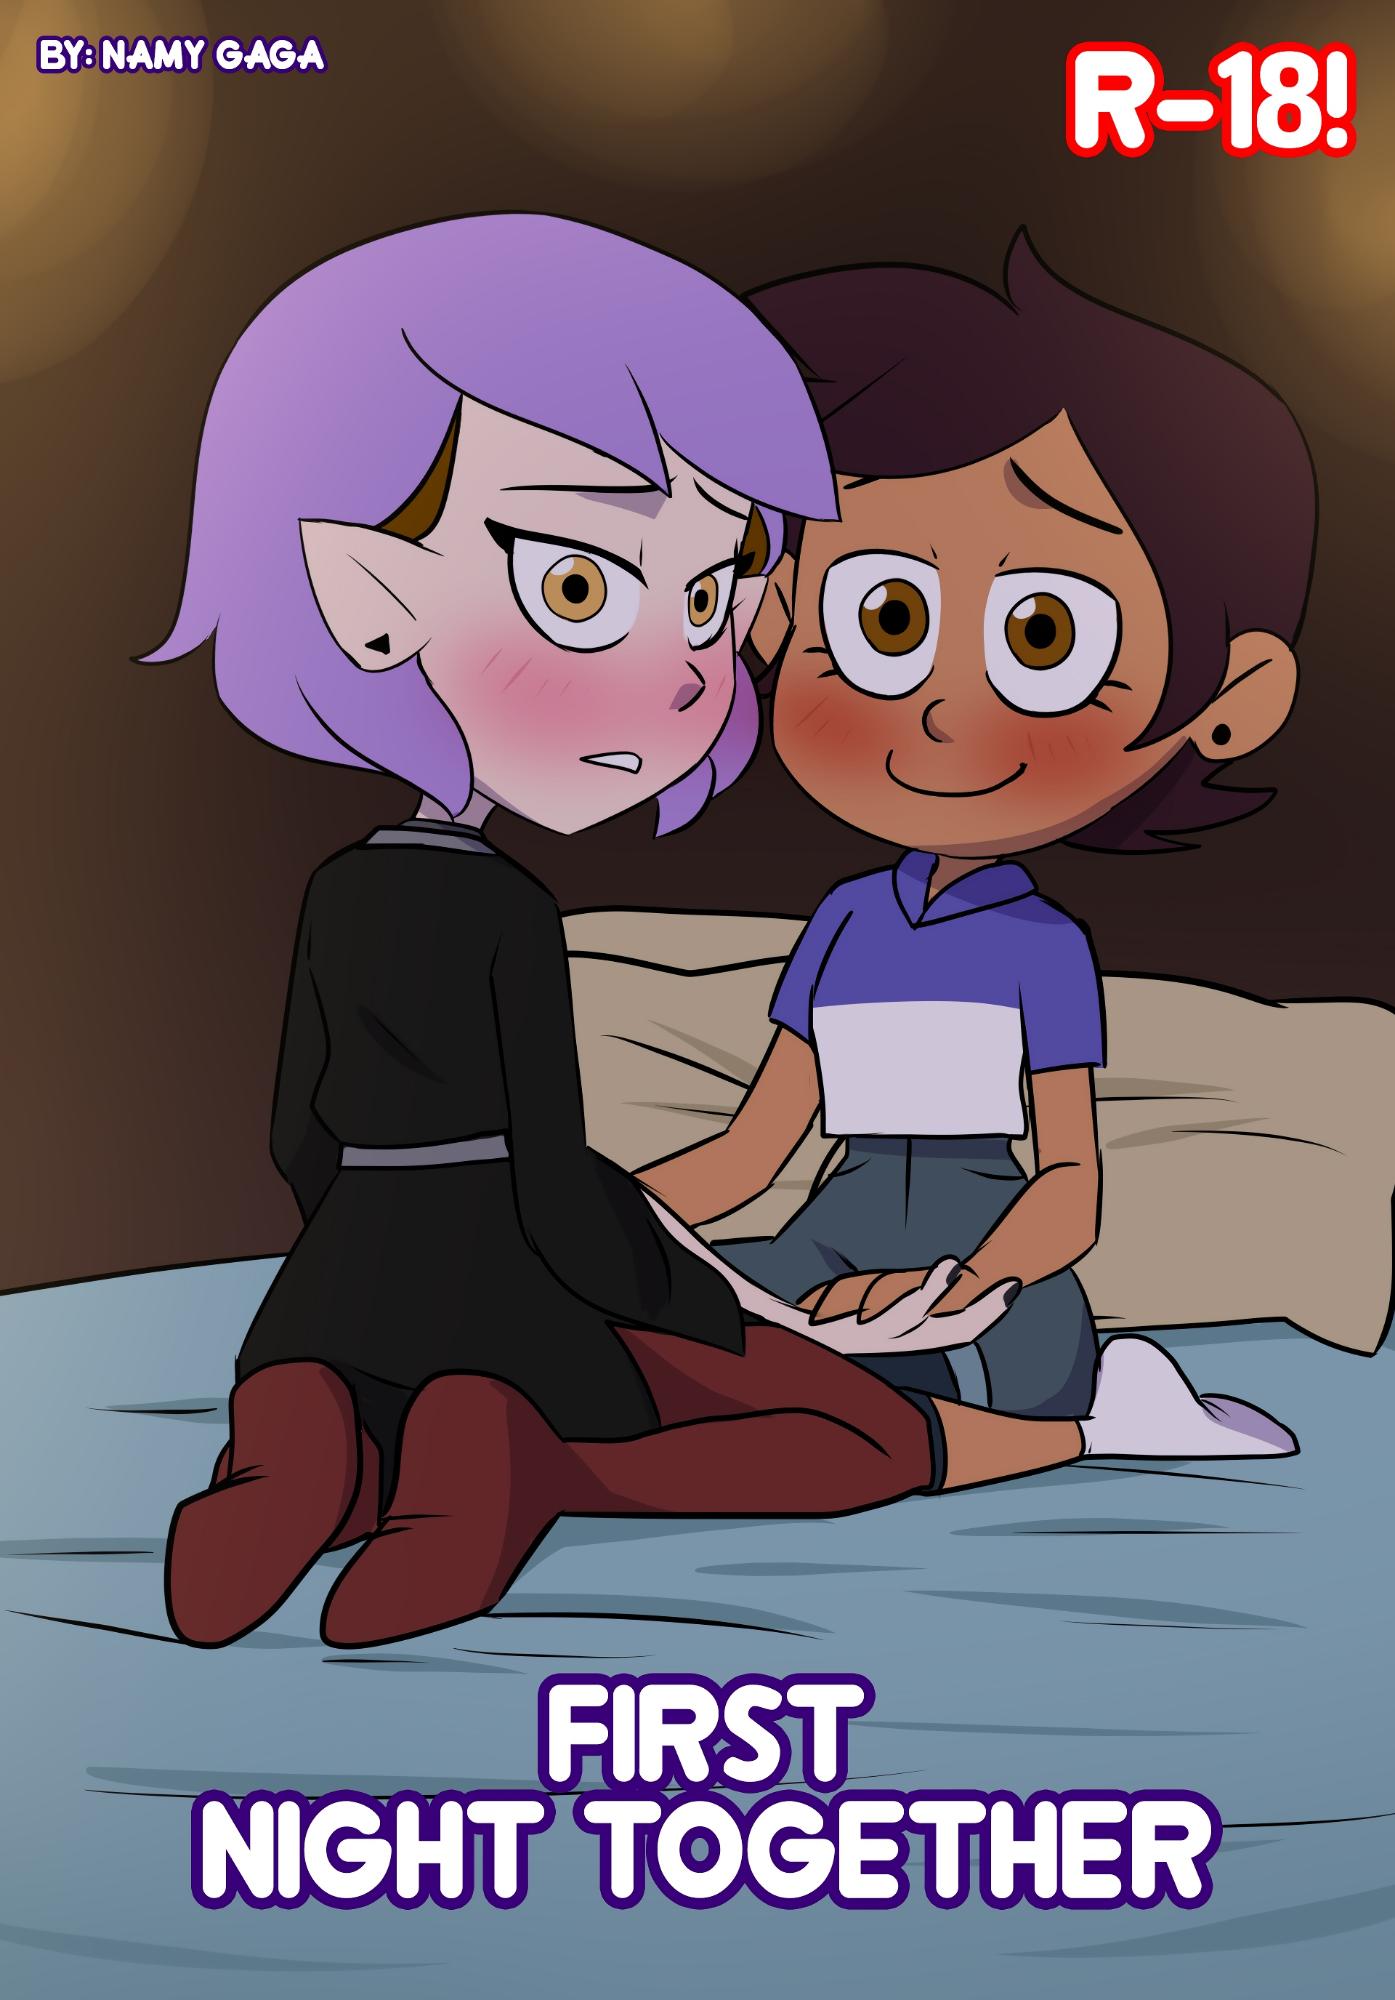 First night together comic